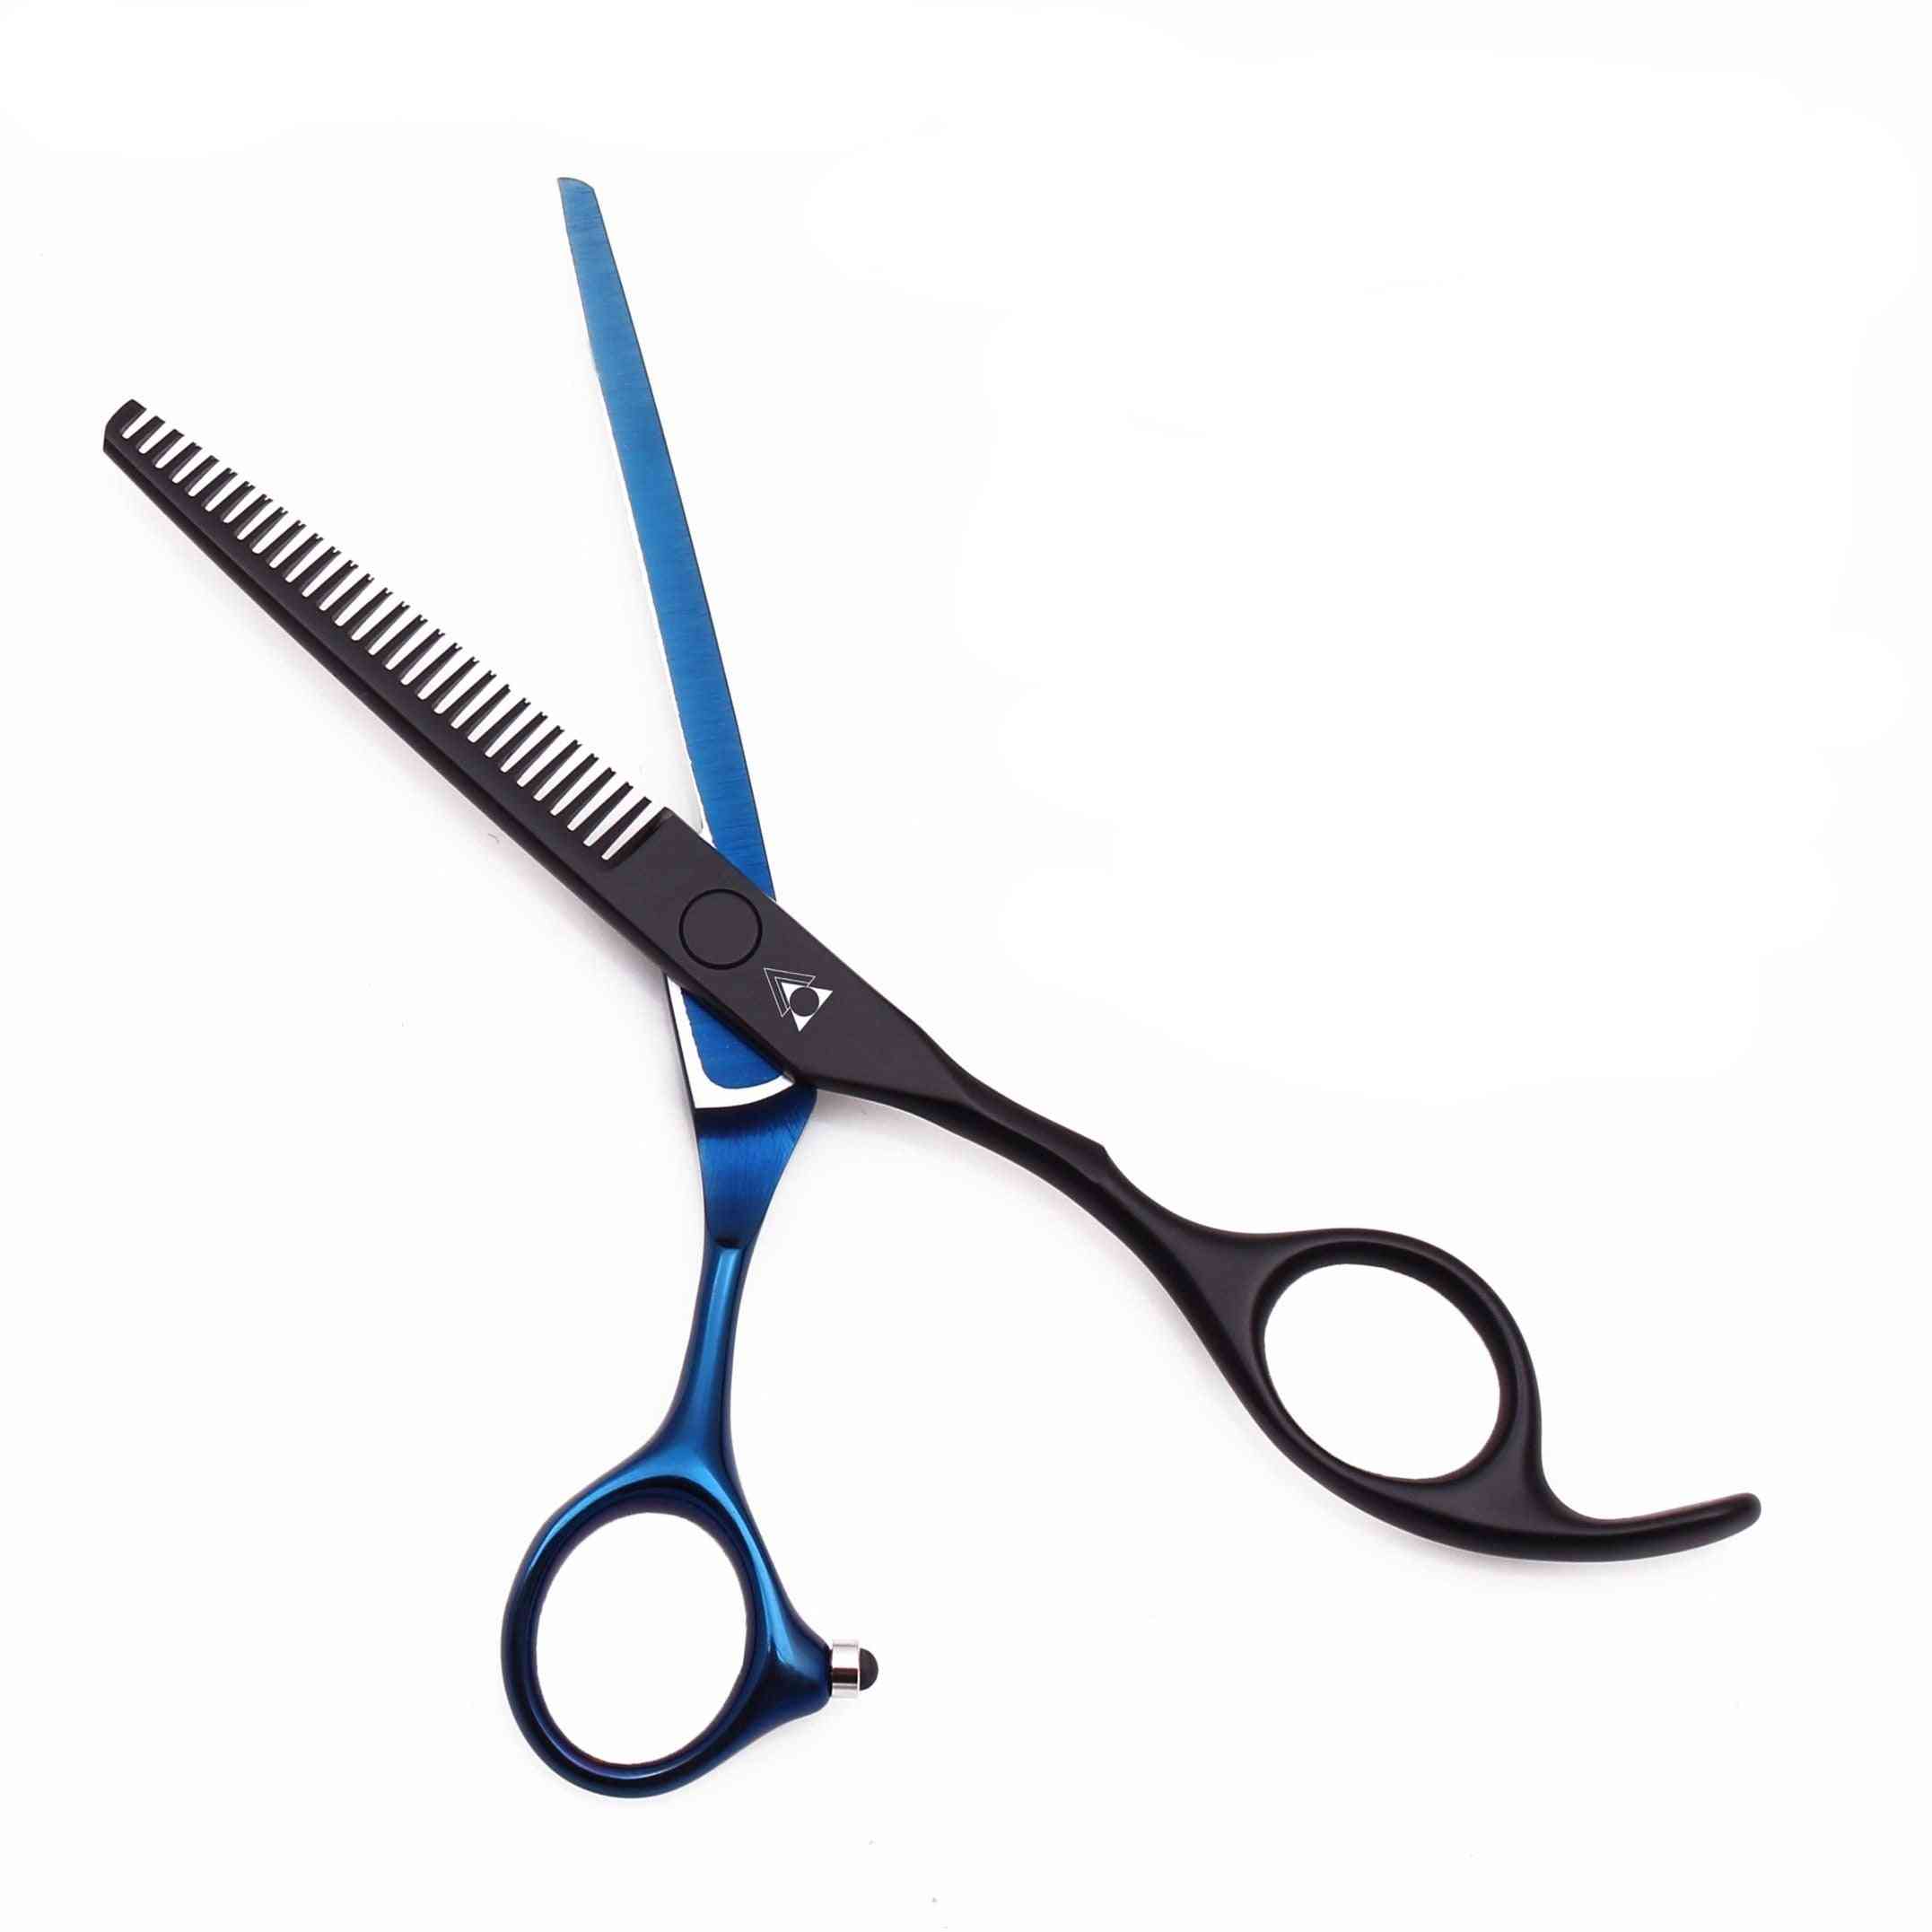 5.5 6.0 Professional Hairdressing Cutting Scissors Thinning Barber Accessories